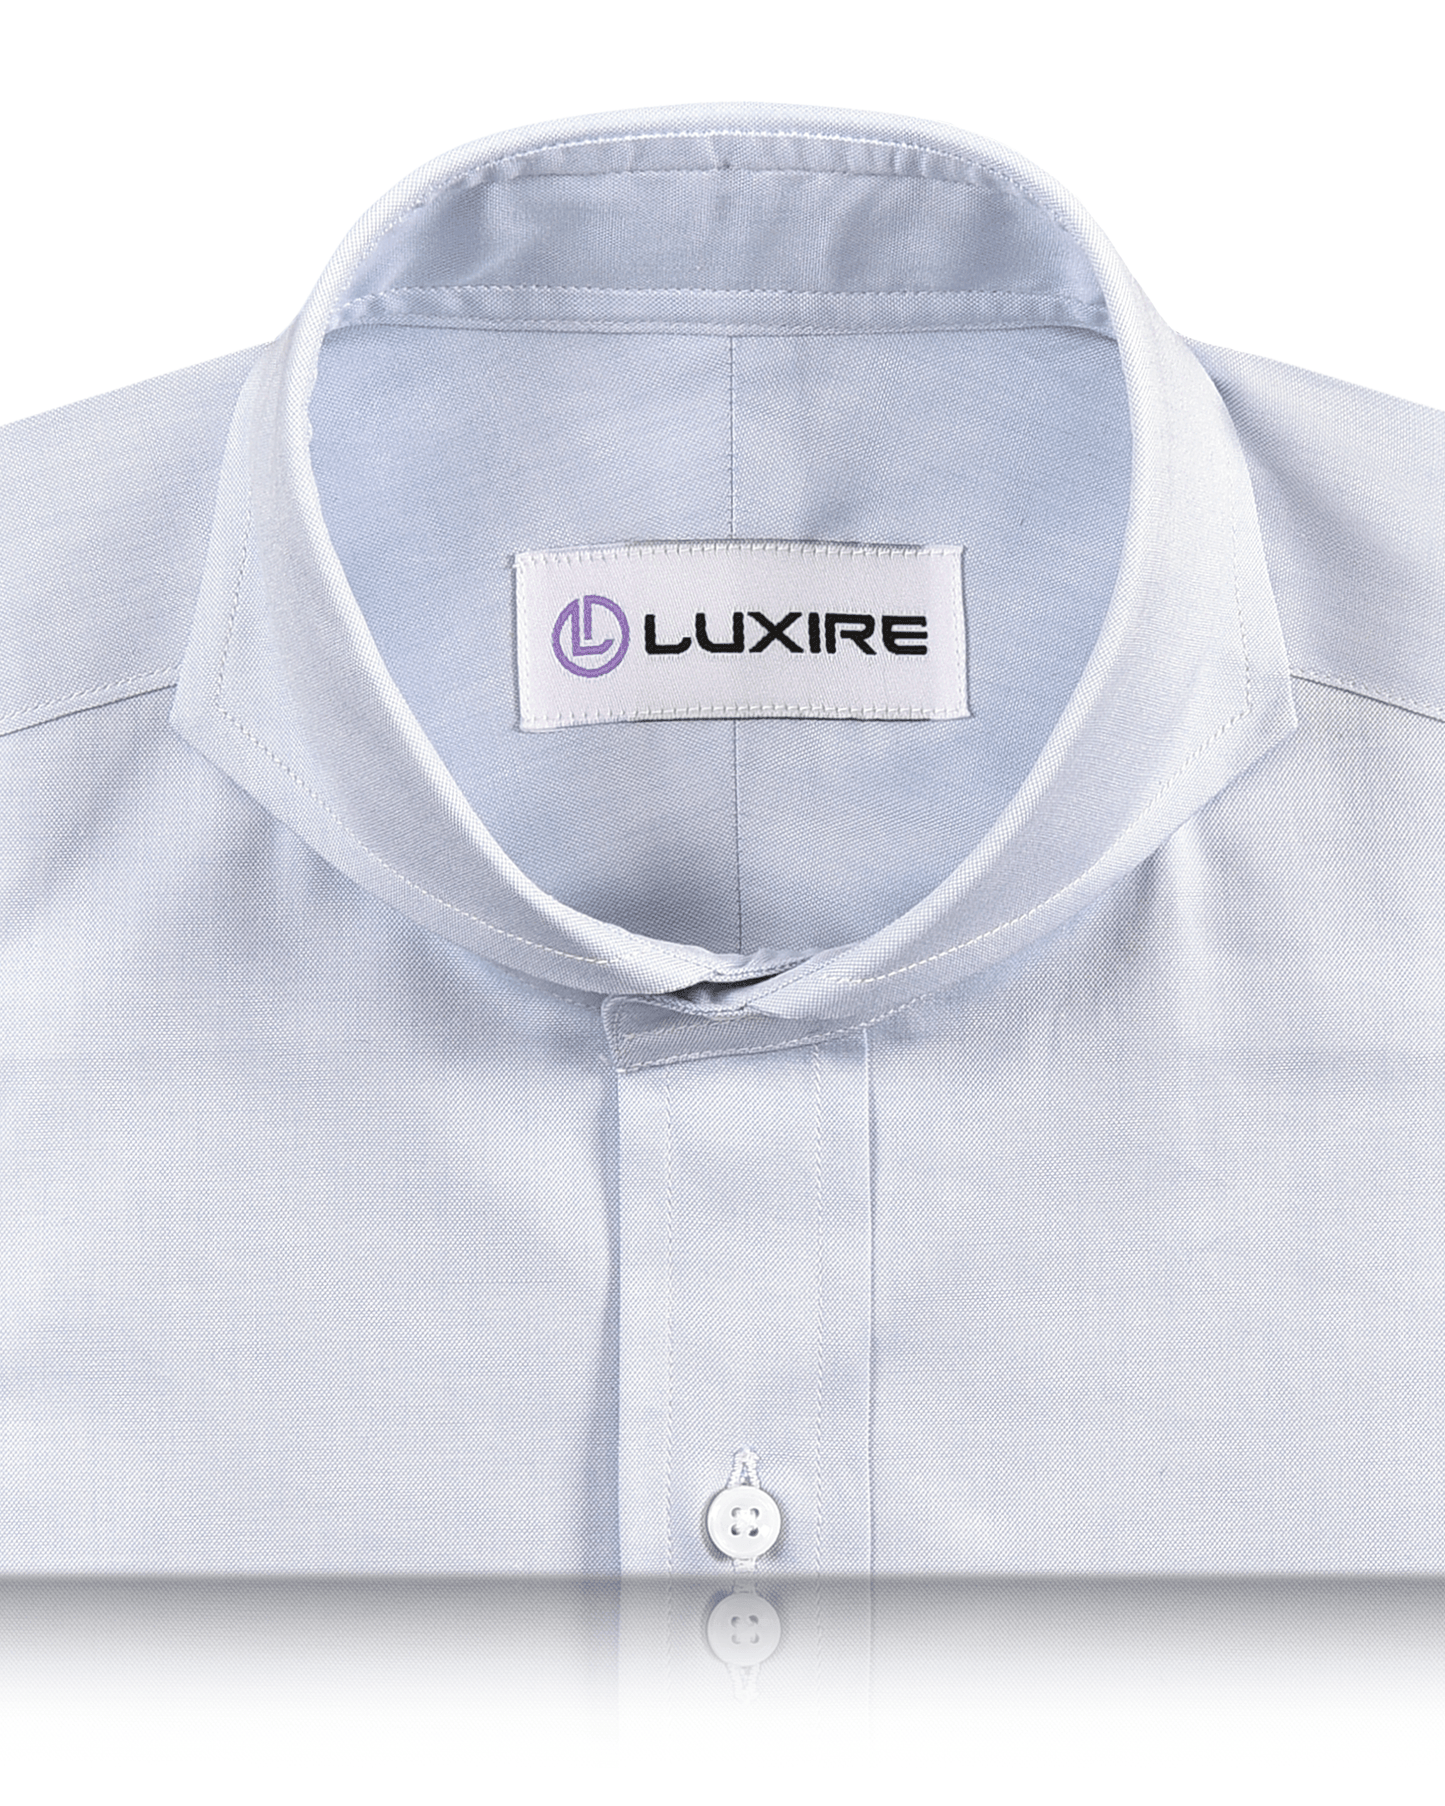 Collar of the custom oxford shirt for men by Luxire in sky blue brembana pinpoint